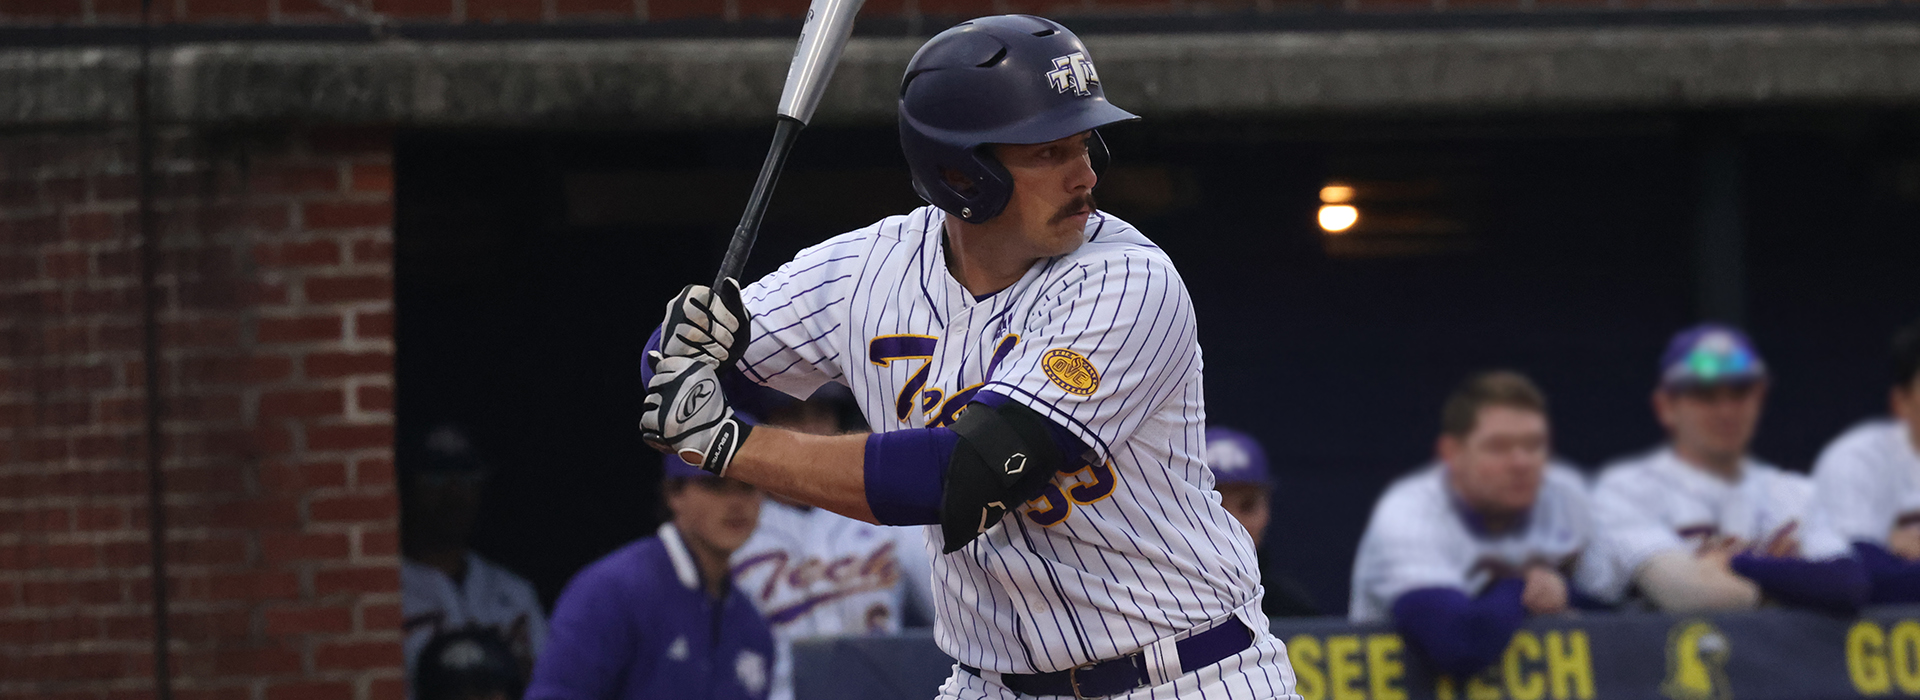 Golden Eagles fall in road midweek tilt to in-state rival Belmont